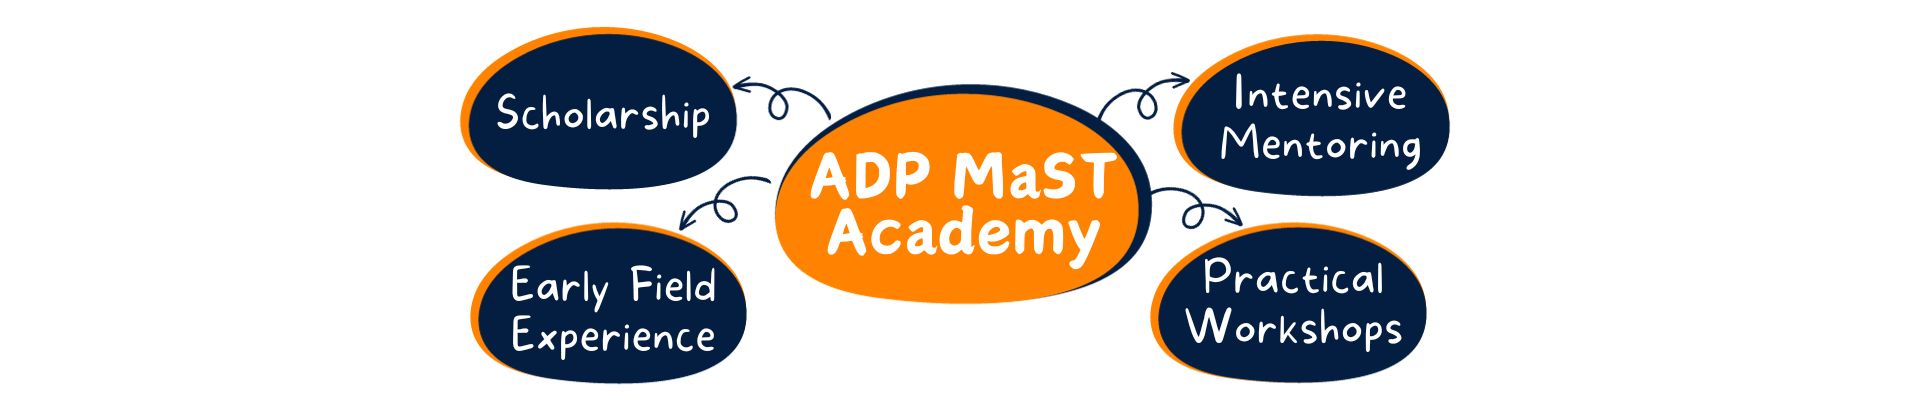 ADP-MaST-Academy-Experiences-3.png